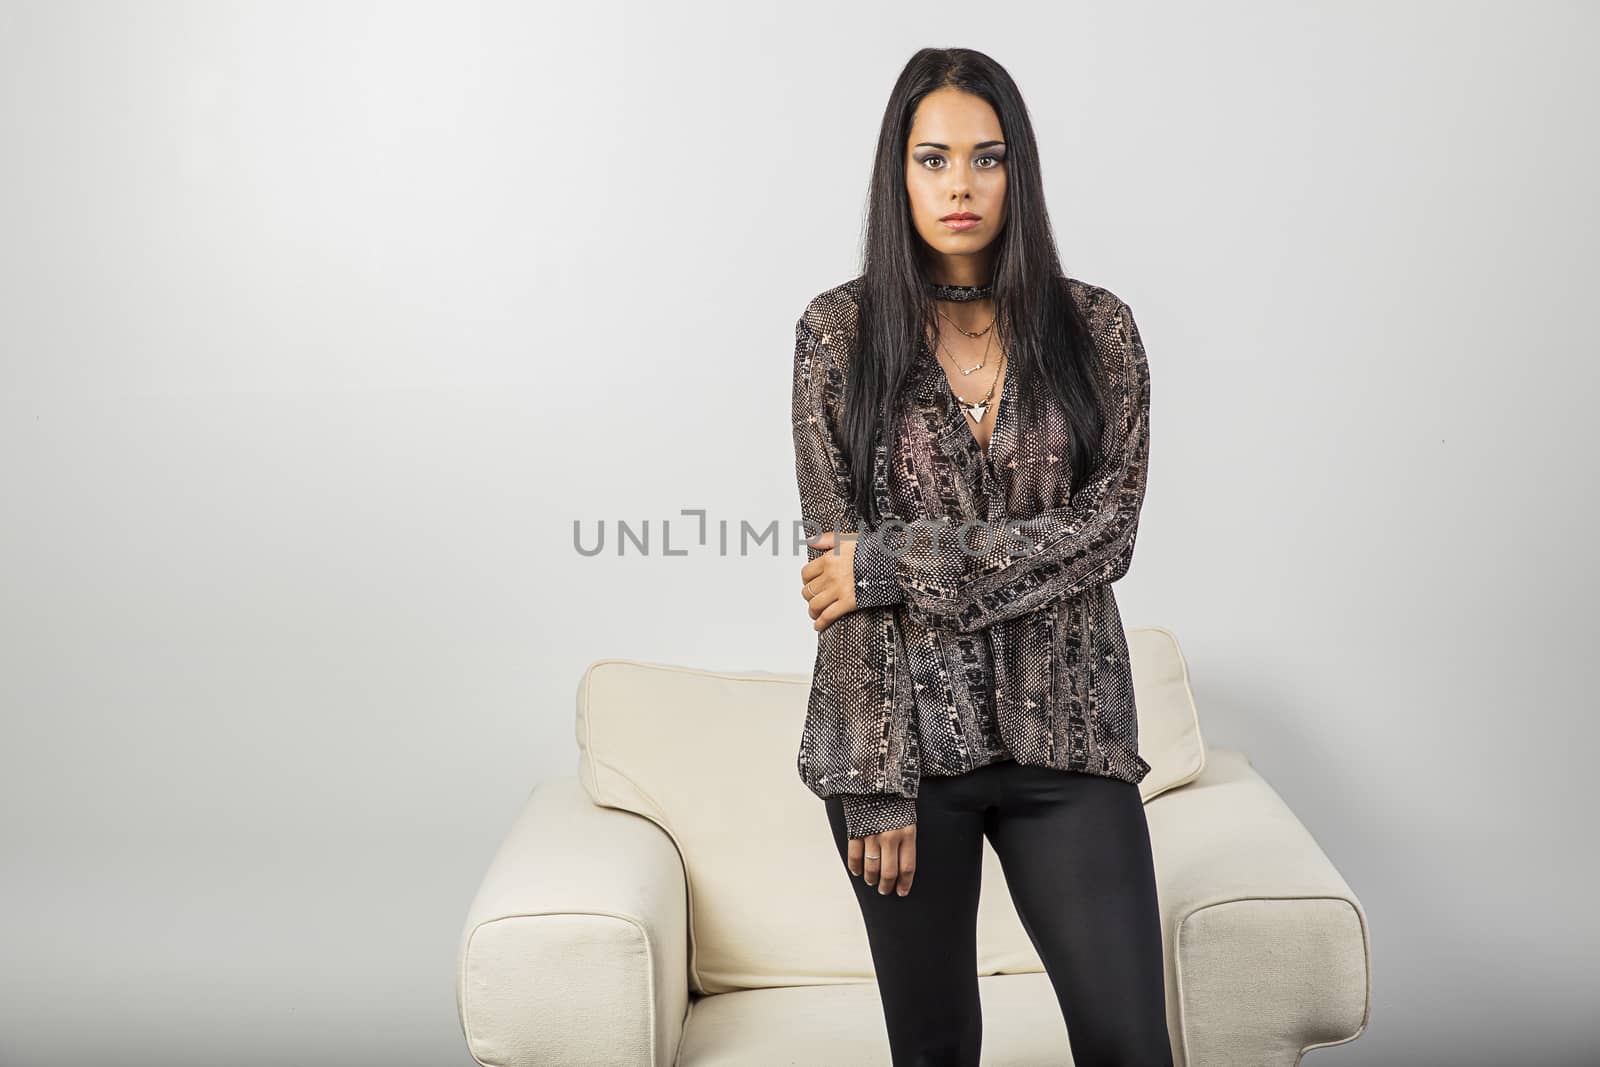 twenty something woman, wearing stylish clothes, standing in front of a white couch